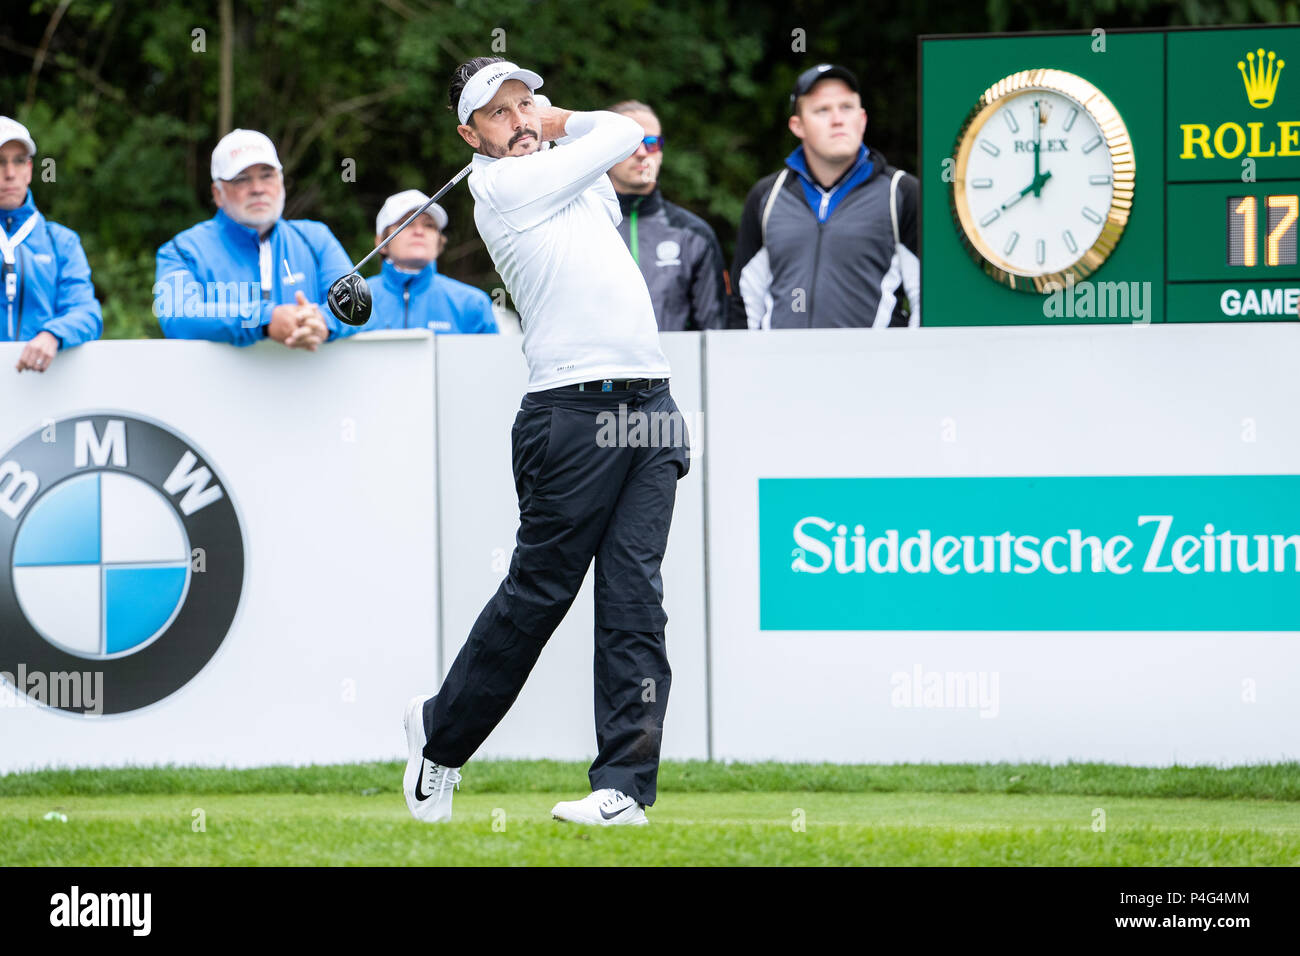 Pulheim, Germany. 22nd June, 2018. Golf: PGA European Tour - International  Open, Men's singles, 2nd round. Mike Lorenzo-Vera, French golf player, in  action. Credit: Marcel Kusch/dpa/Alamy Live News Credit: dpa picture  alliance/Alamy